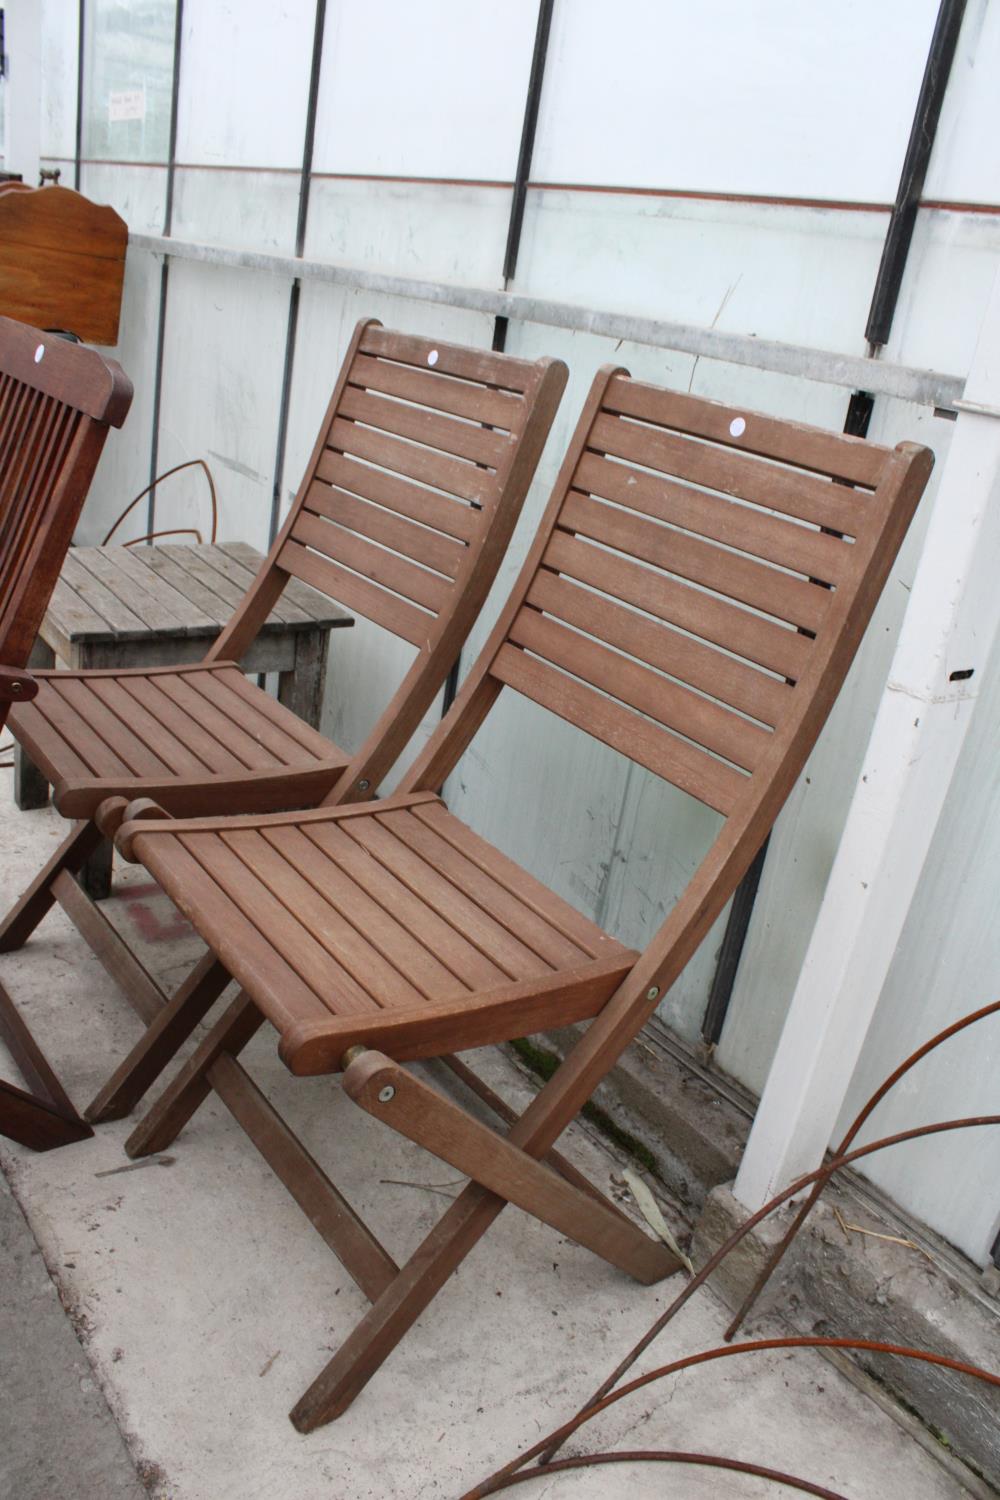 TWO PAIRS OF TEAK FOLDING CHAIRS AND A WOODEN SLATTED TABLE - Bild 4 aus 4